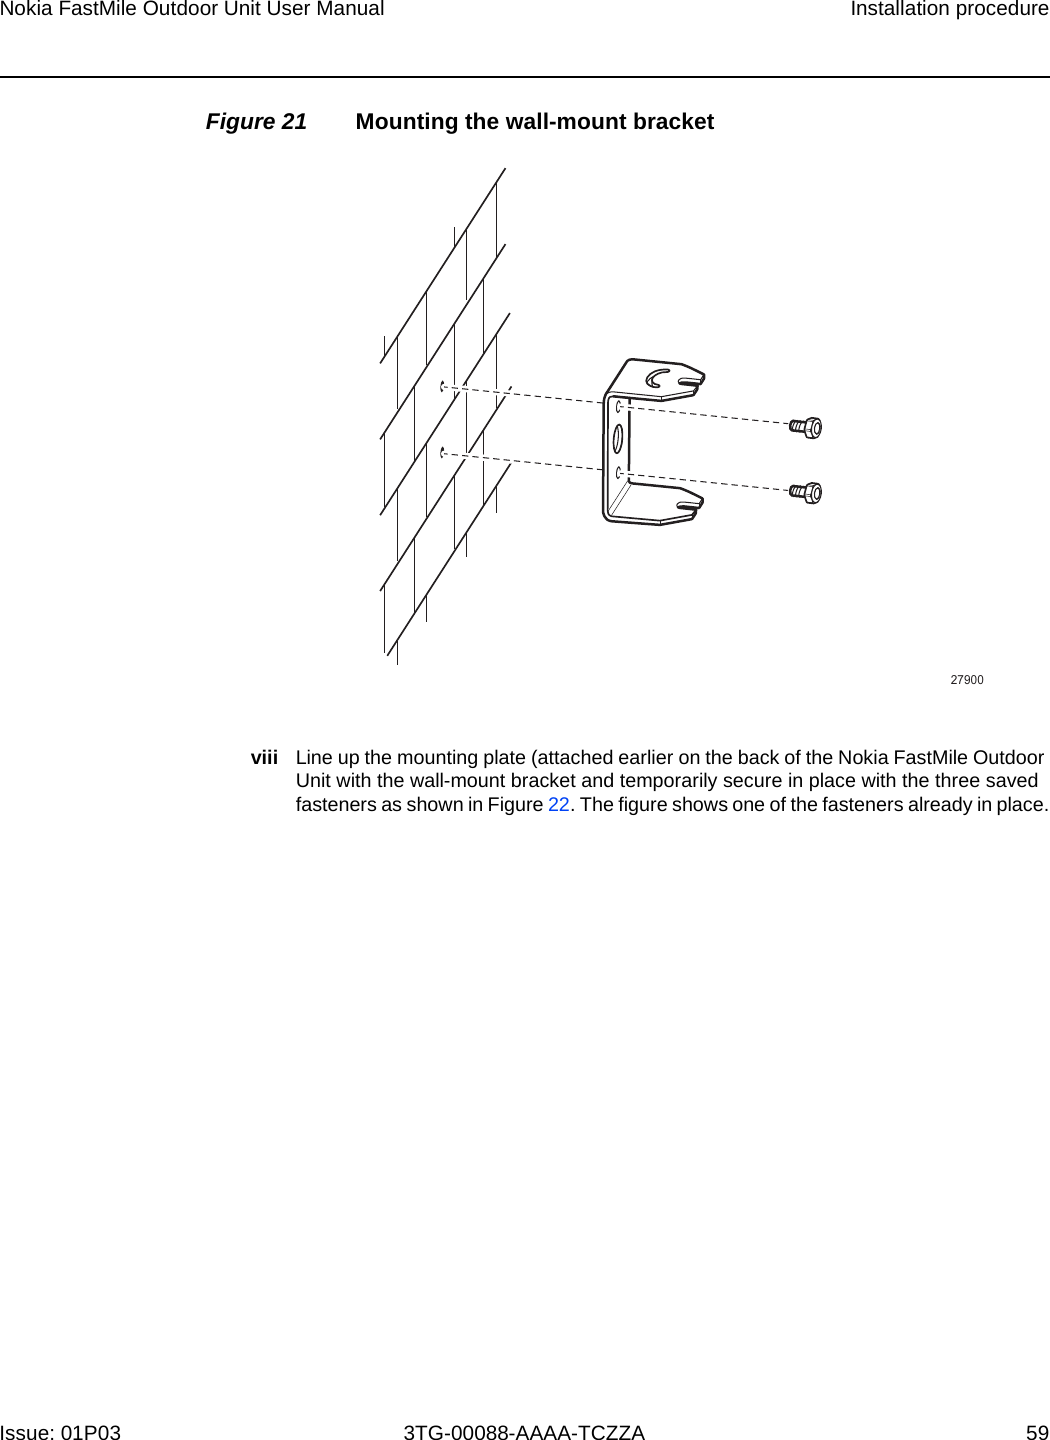 Page 54 of Nokia Bell 34003800FM20 FastMile Compact User Manual Nokia FastMile Outdoor Unit